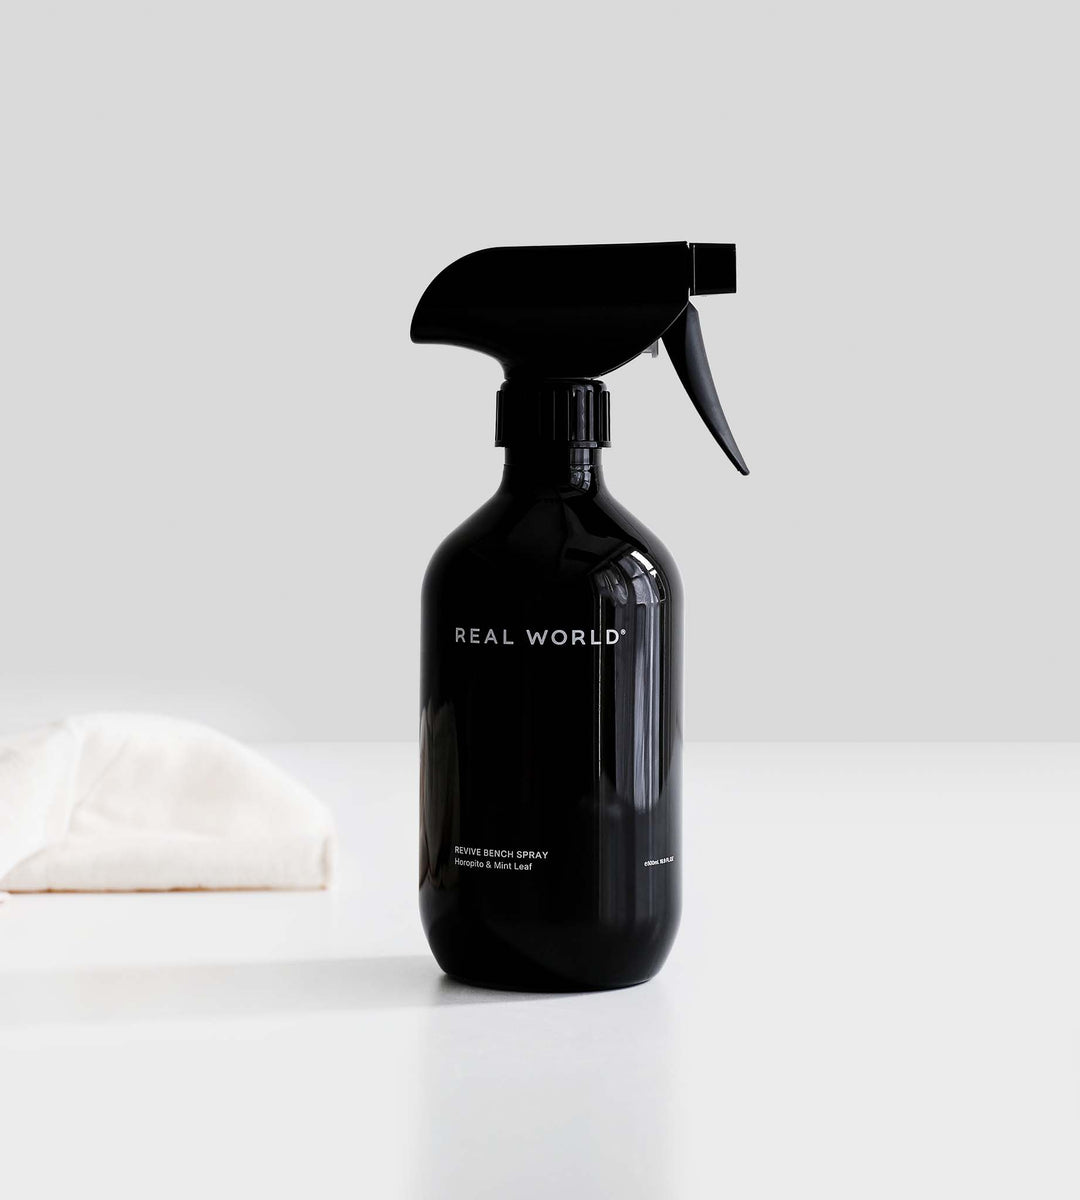 Real World | Revive Bench Spray | Horopito, Cucumber & Mint